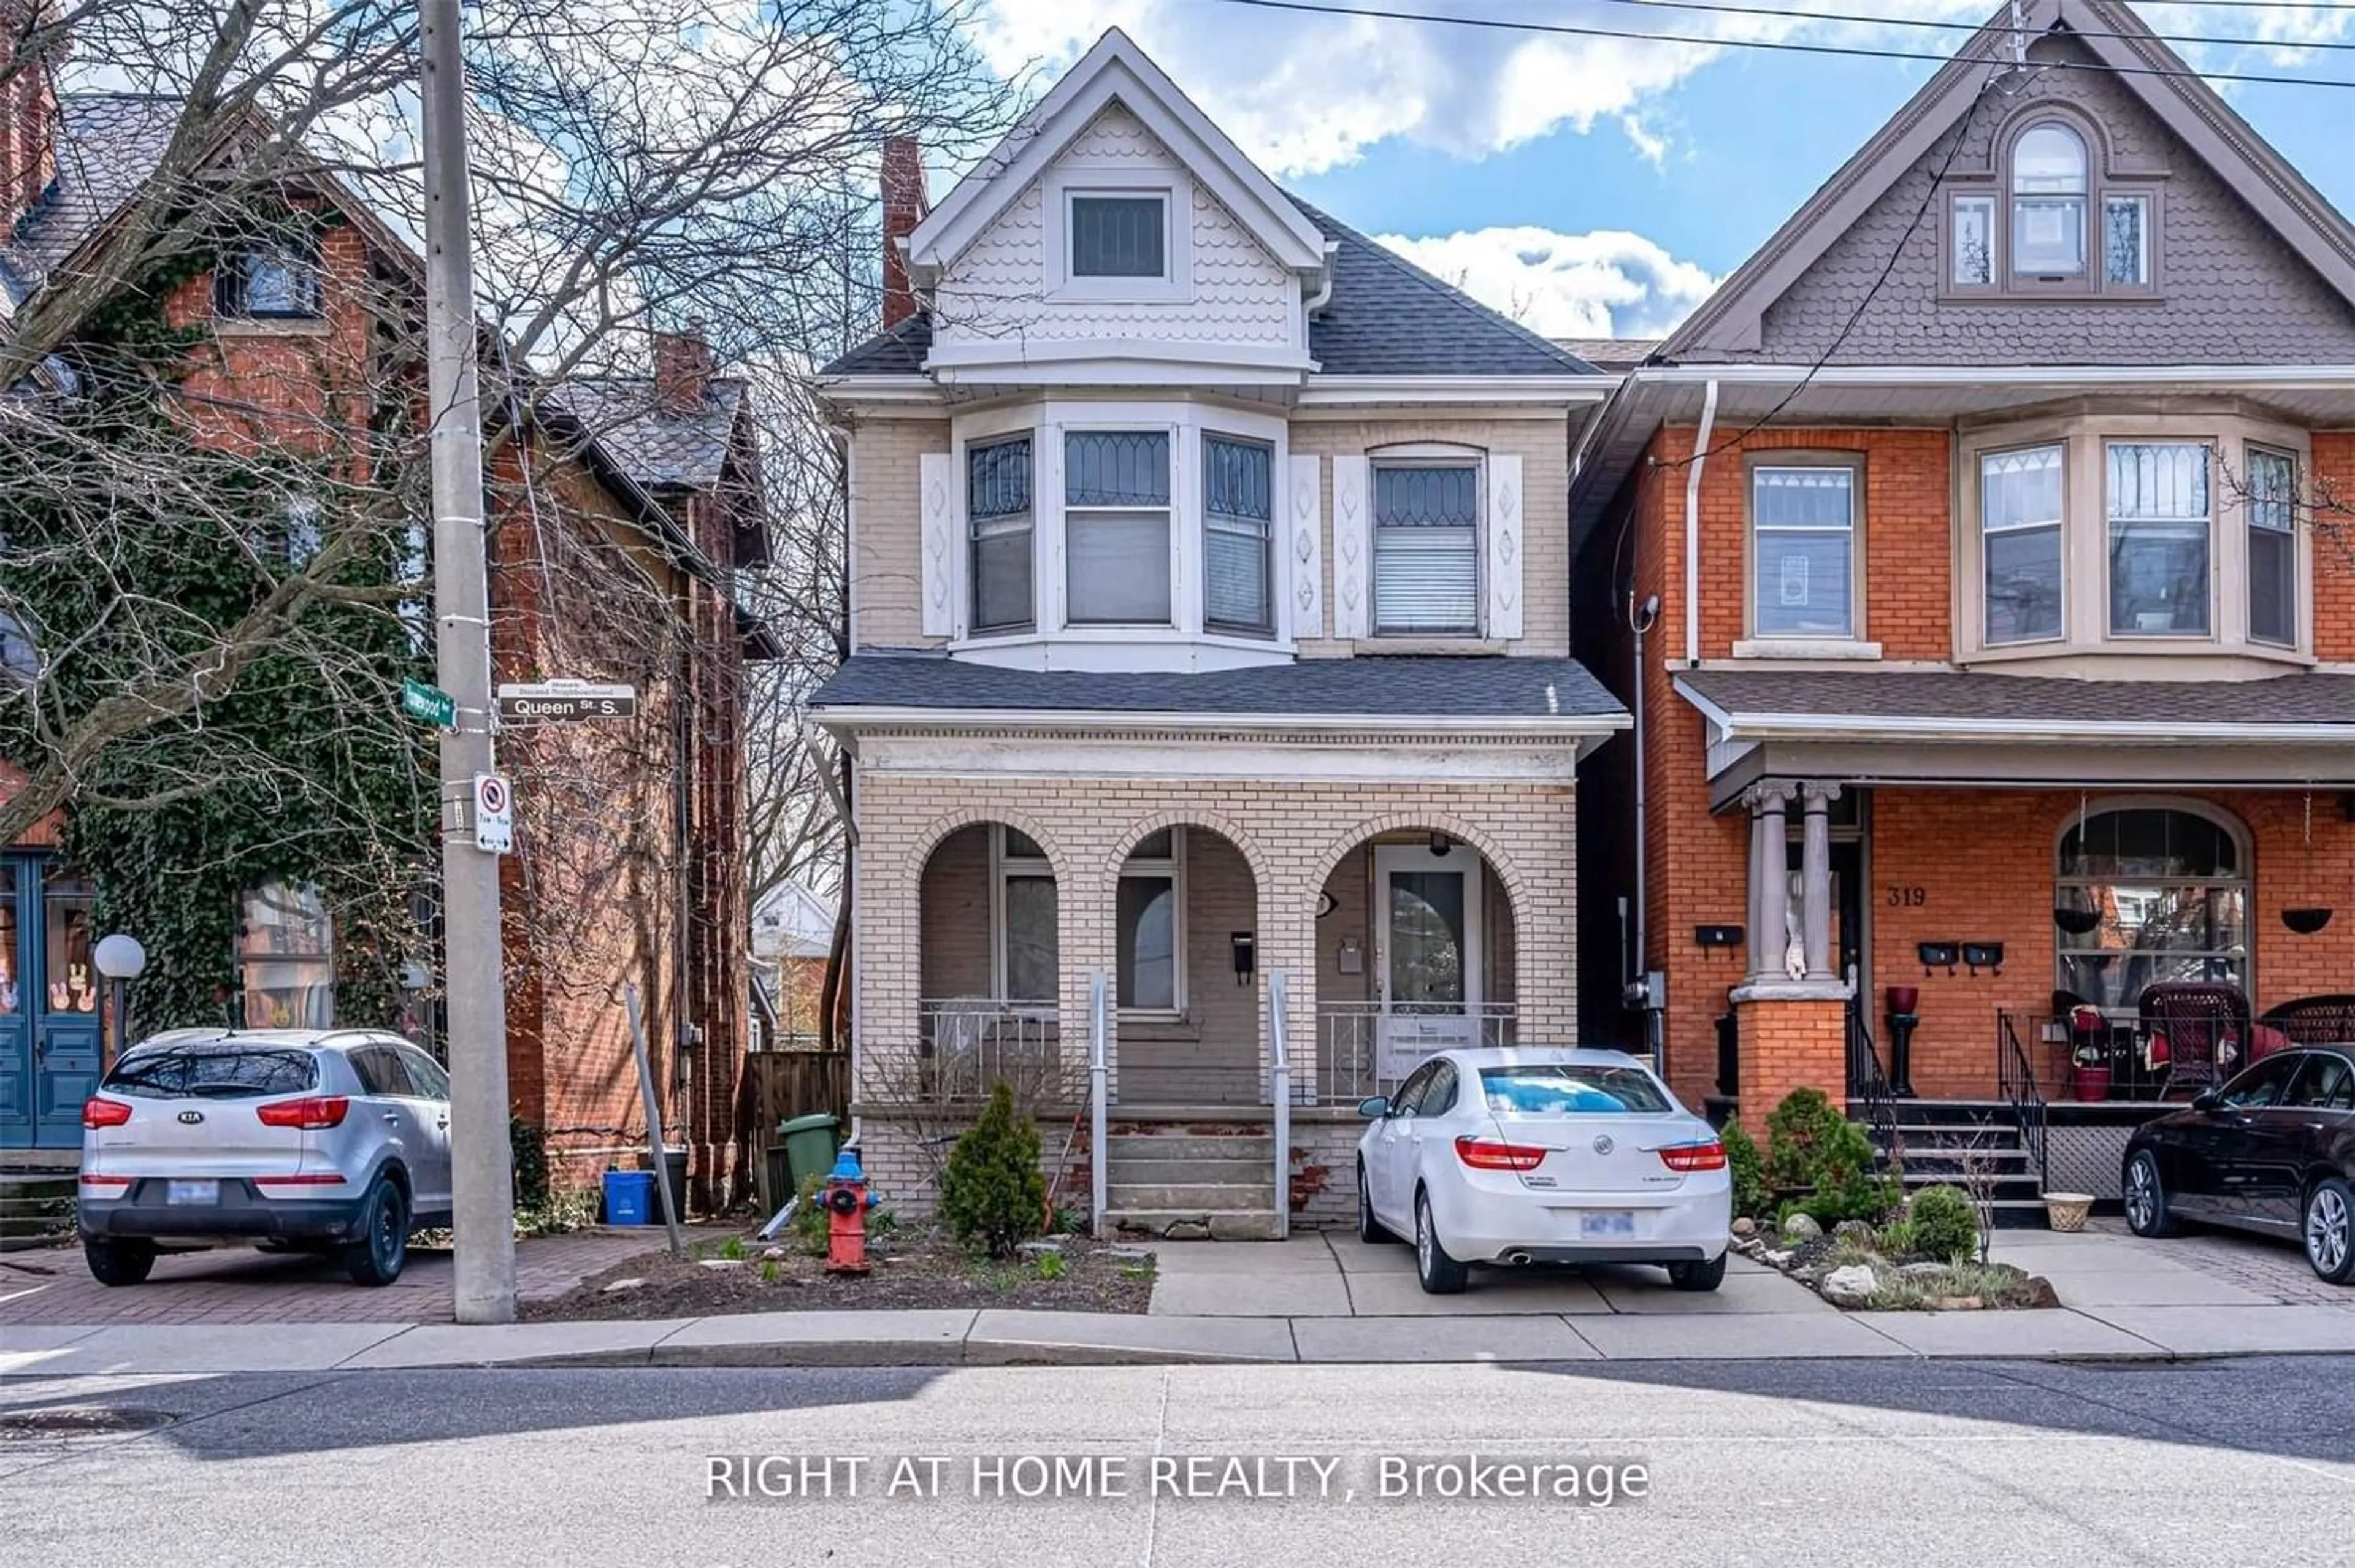 Street view for 317 Queen St, Hamilton Ontario L8P 3T6